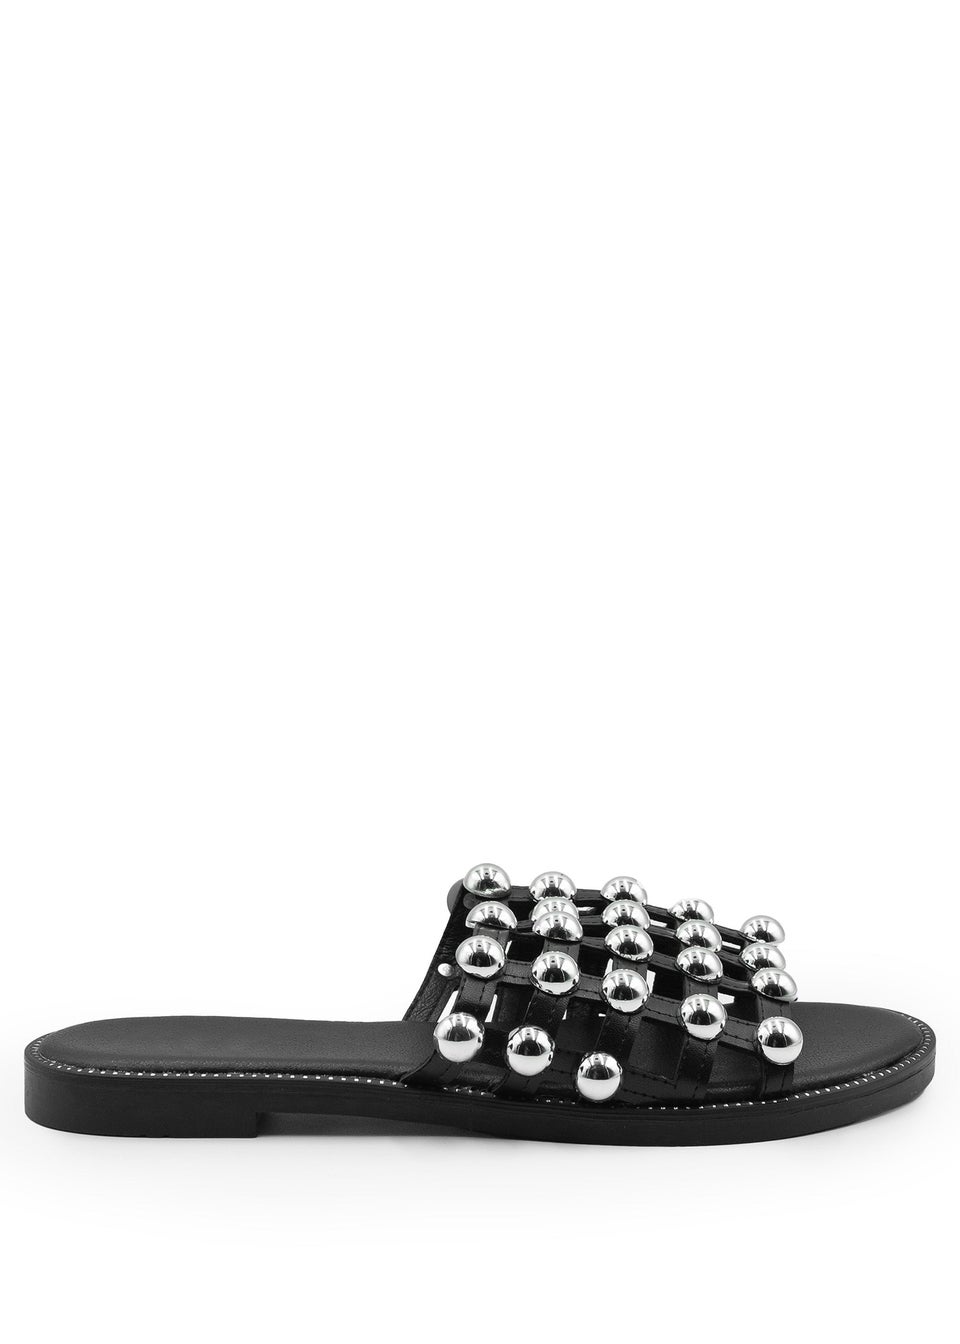 Where's That From Black Pu Kelly Sliders With Studded Detailing